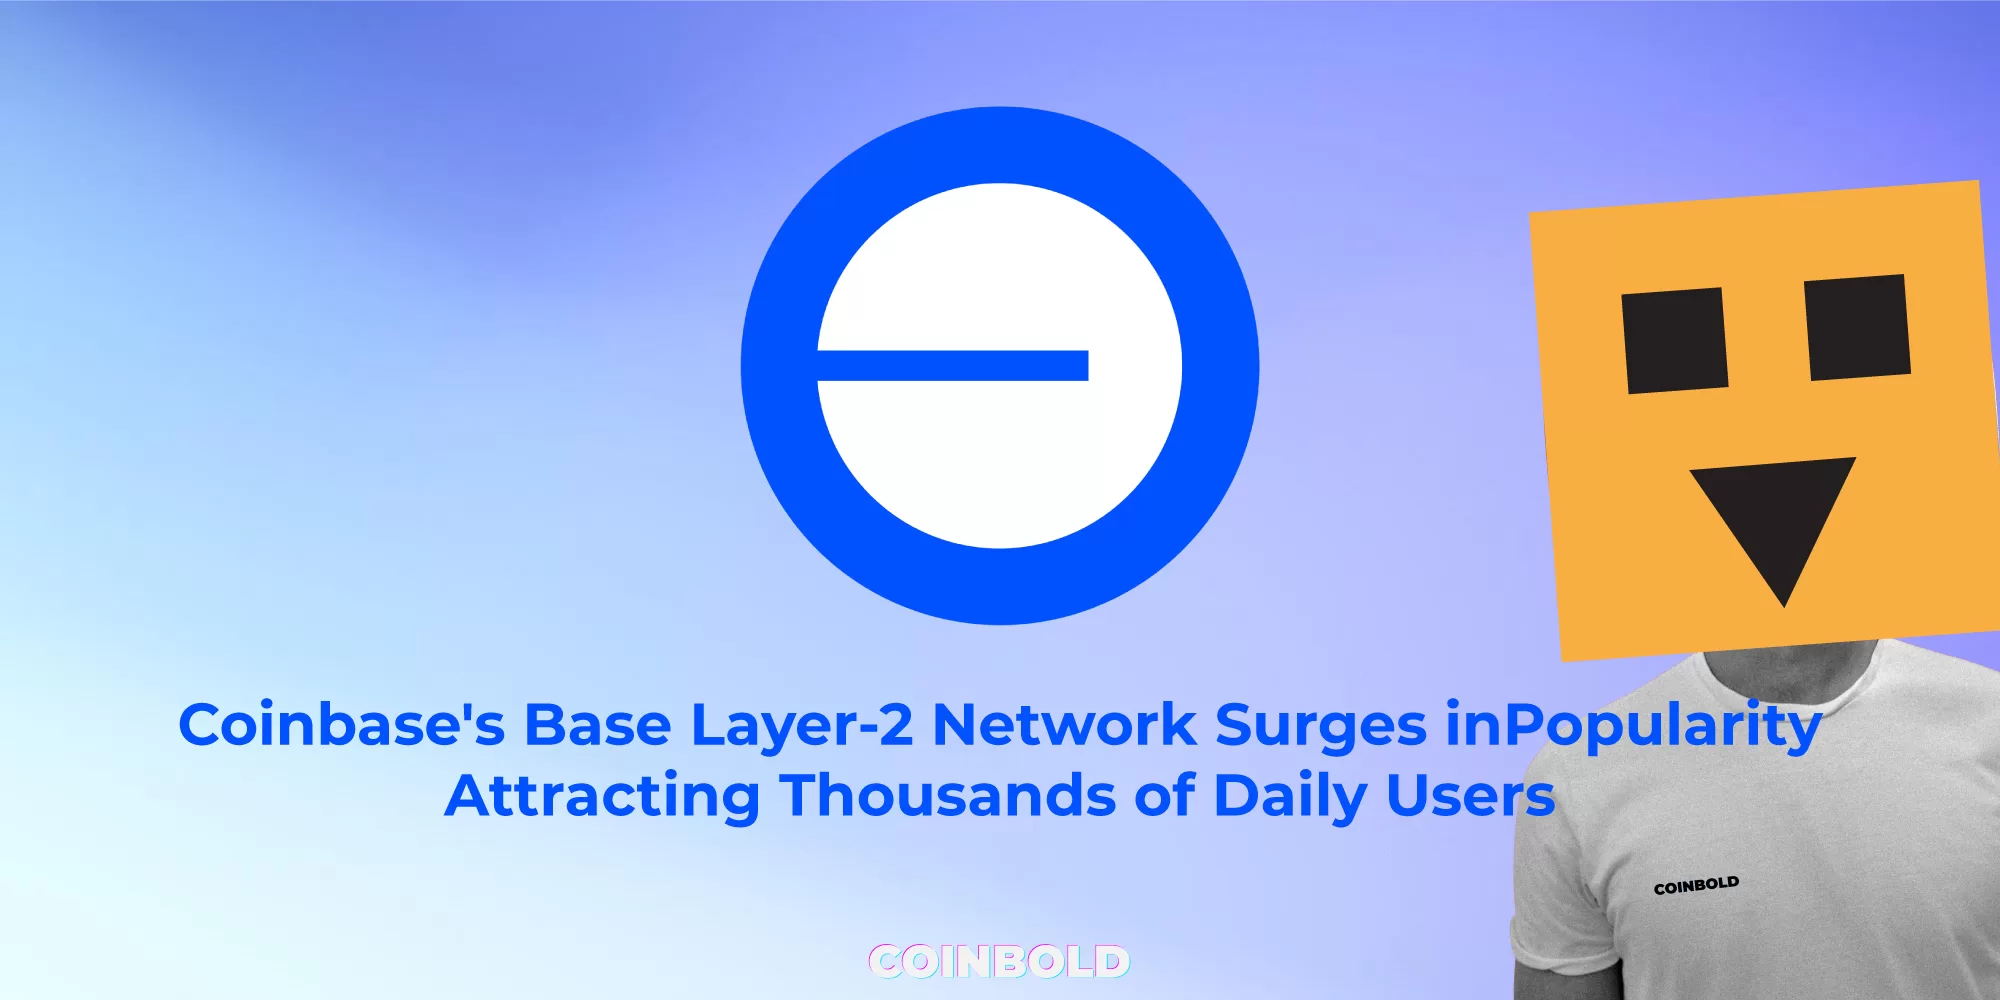 Coinbase's Base Layer 2 Network Surges in Popularity, Attracting Thousands of Daily Users